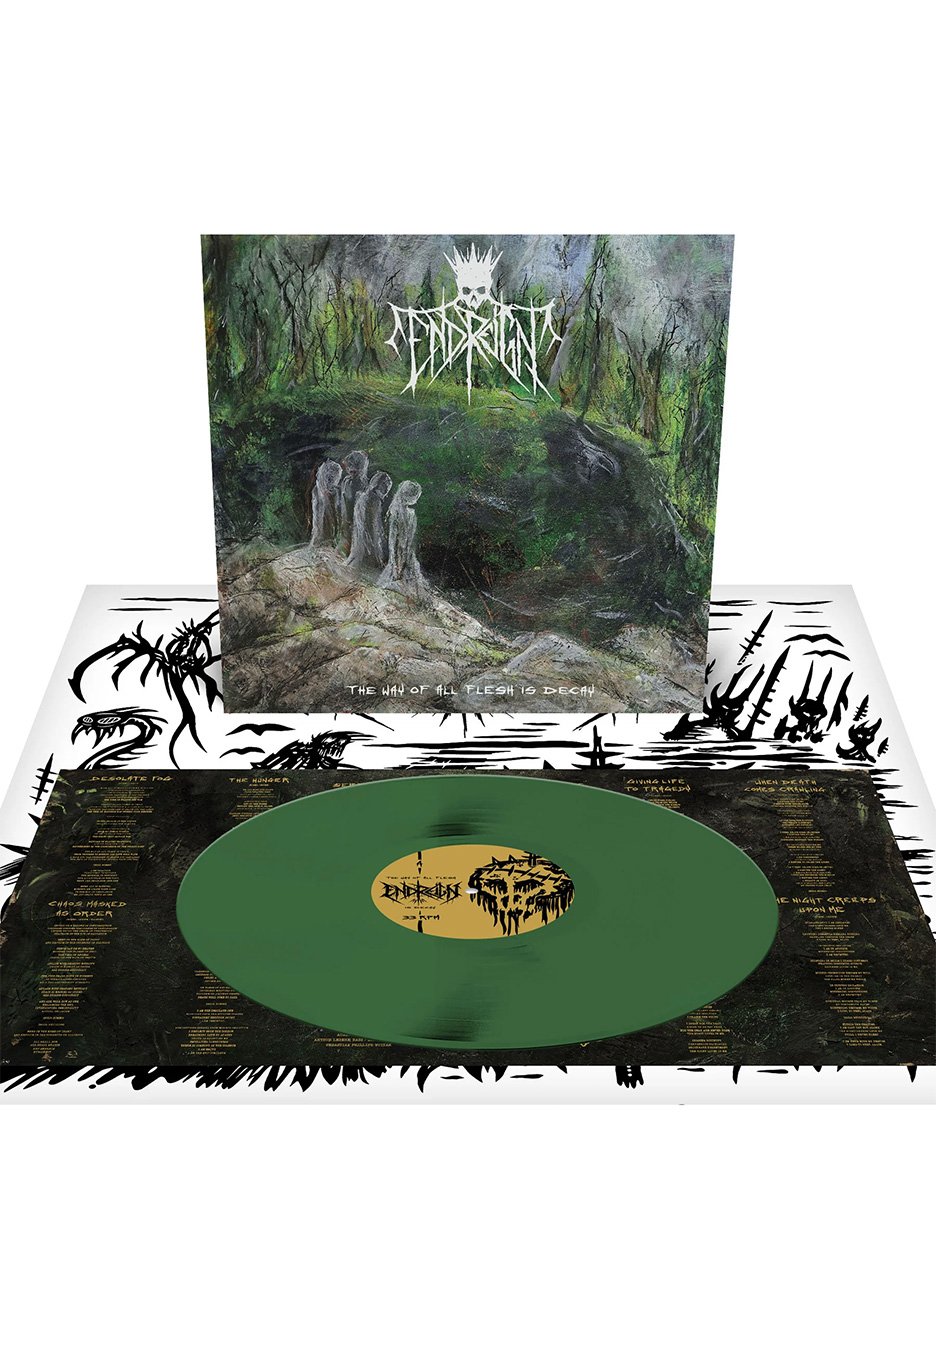 End Reign - Way Of All Flesh Is Decay Evergreen - Colored Vinyl